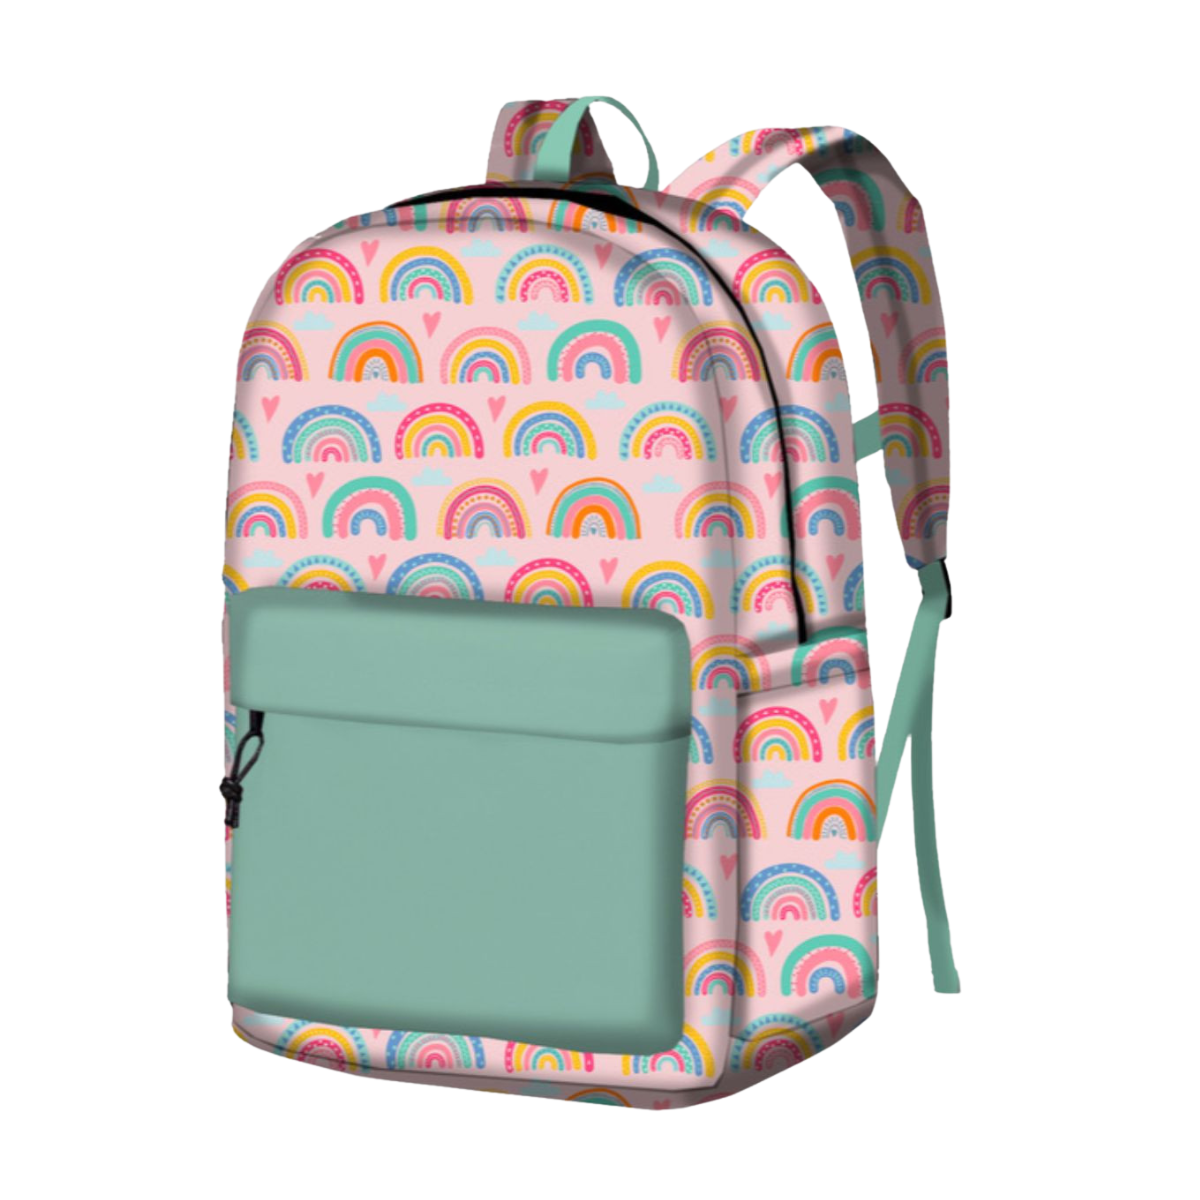 brighter days kids backpack on a white background